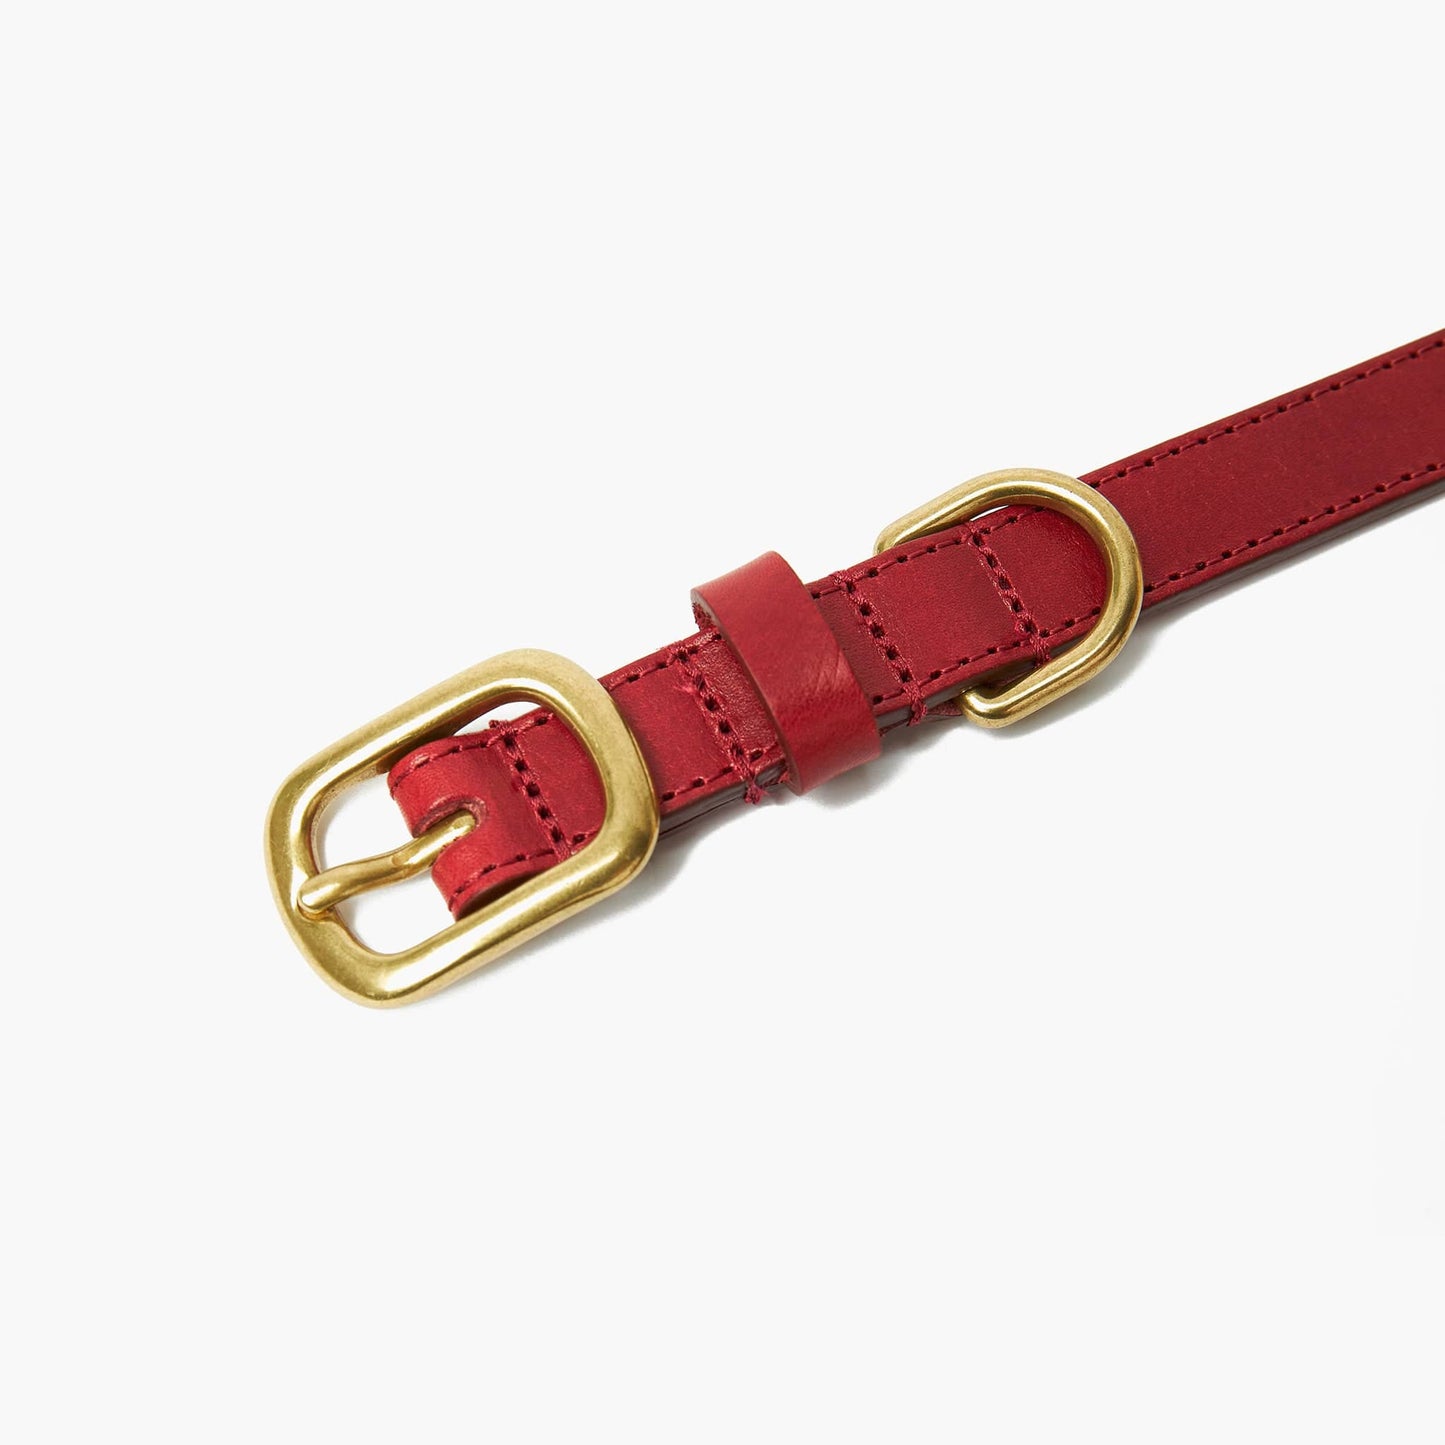 Crimson Red Leather Dog Collar with Gold Buckle